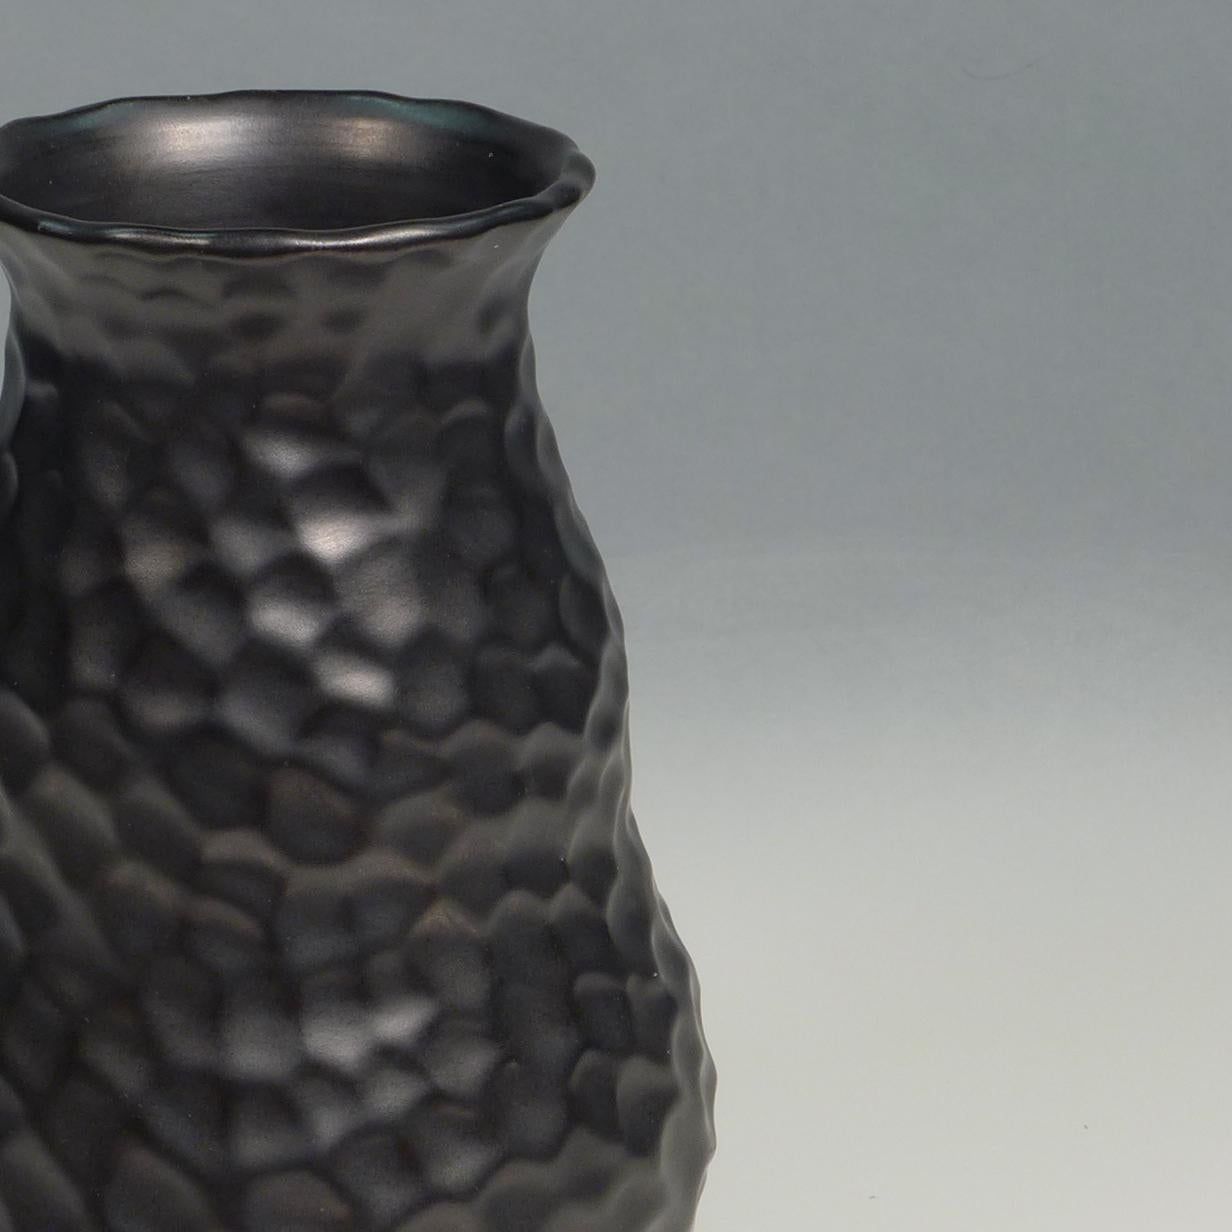 Elegant dimple vase designed by Gerardus Klinkenberg and produced at the Katwijk factory in the Netherlands, circa 1920s
Materials: Ceramic stoneware with a smooth black matt glaze.